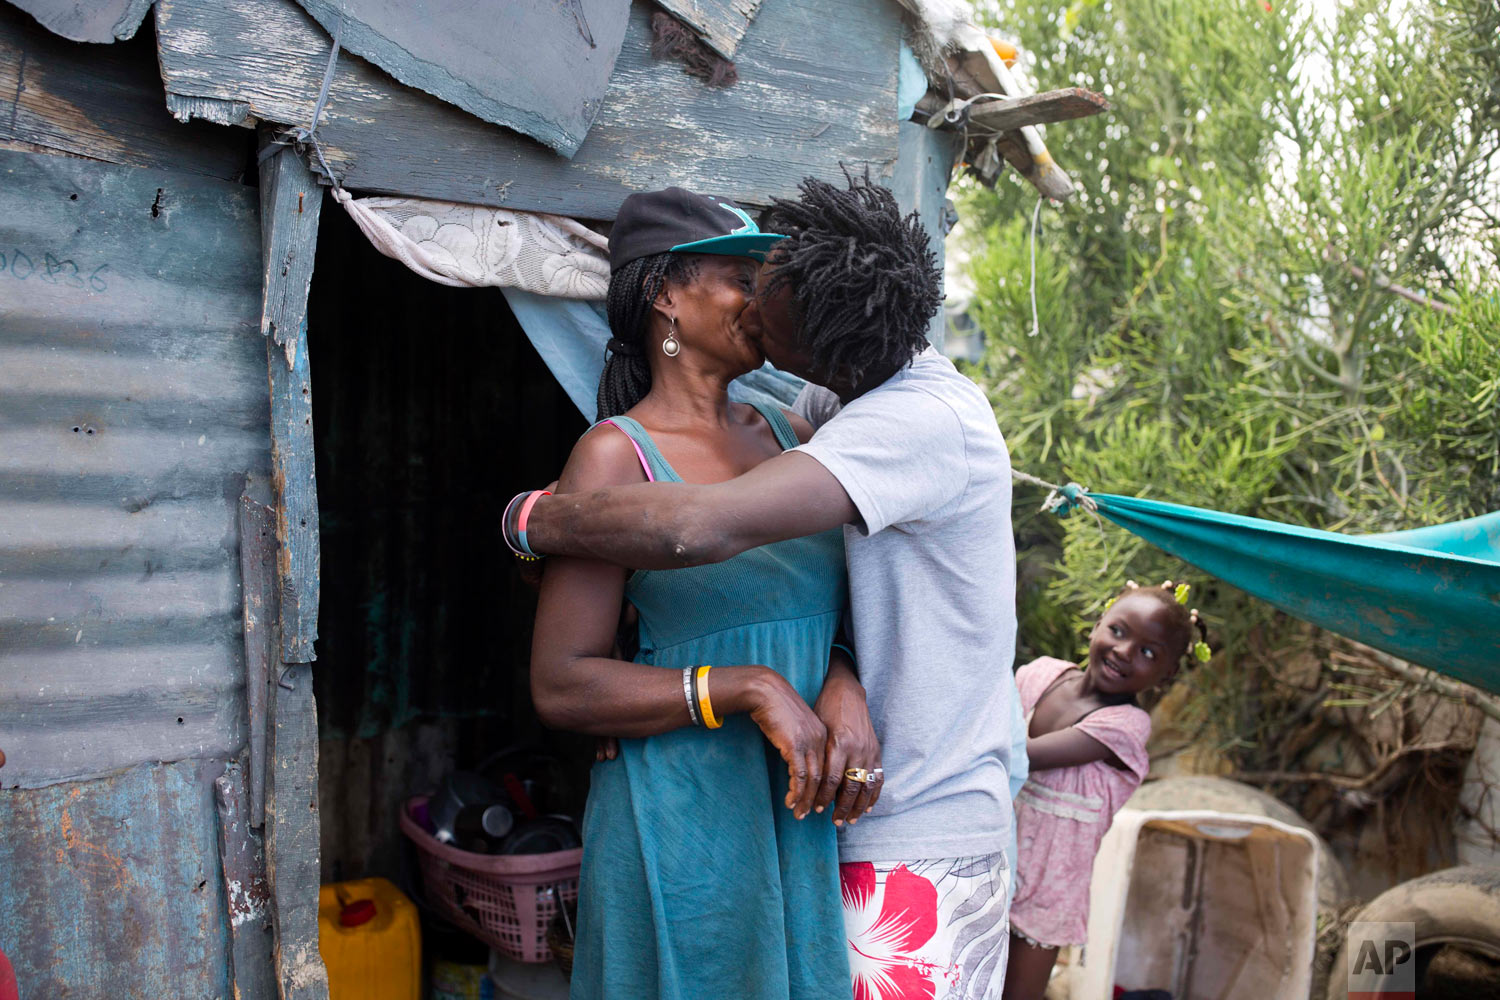  Changlair Aristide kisses his wife Violene Mareus as their daughter Viergeline looks on outside their home.  Mareus cares for their three daughters at home where she sells cigarettes and alcohol. Aug. 25, 2018. (AP Photo/Dieu Nalio Chery) 